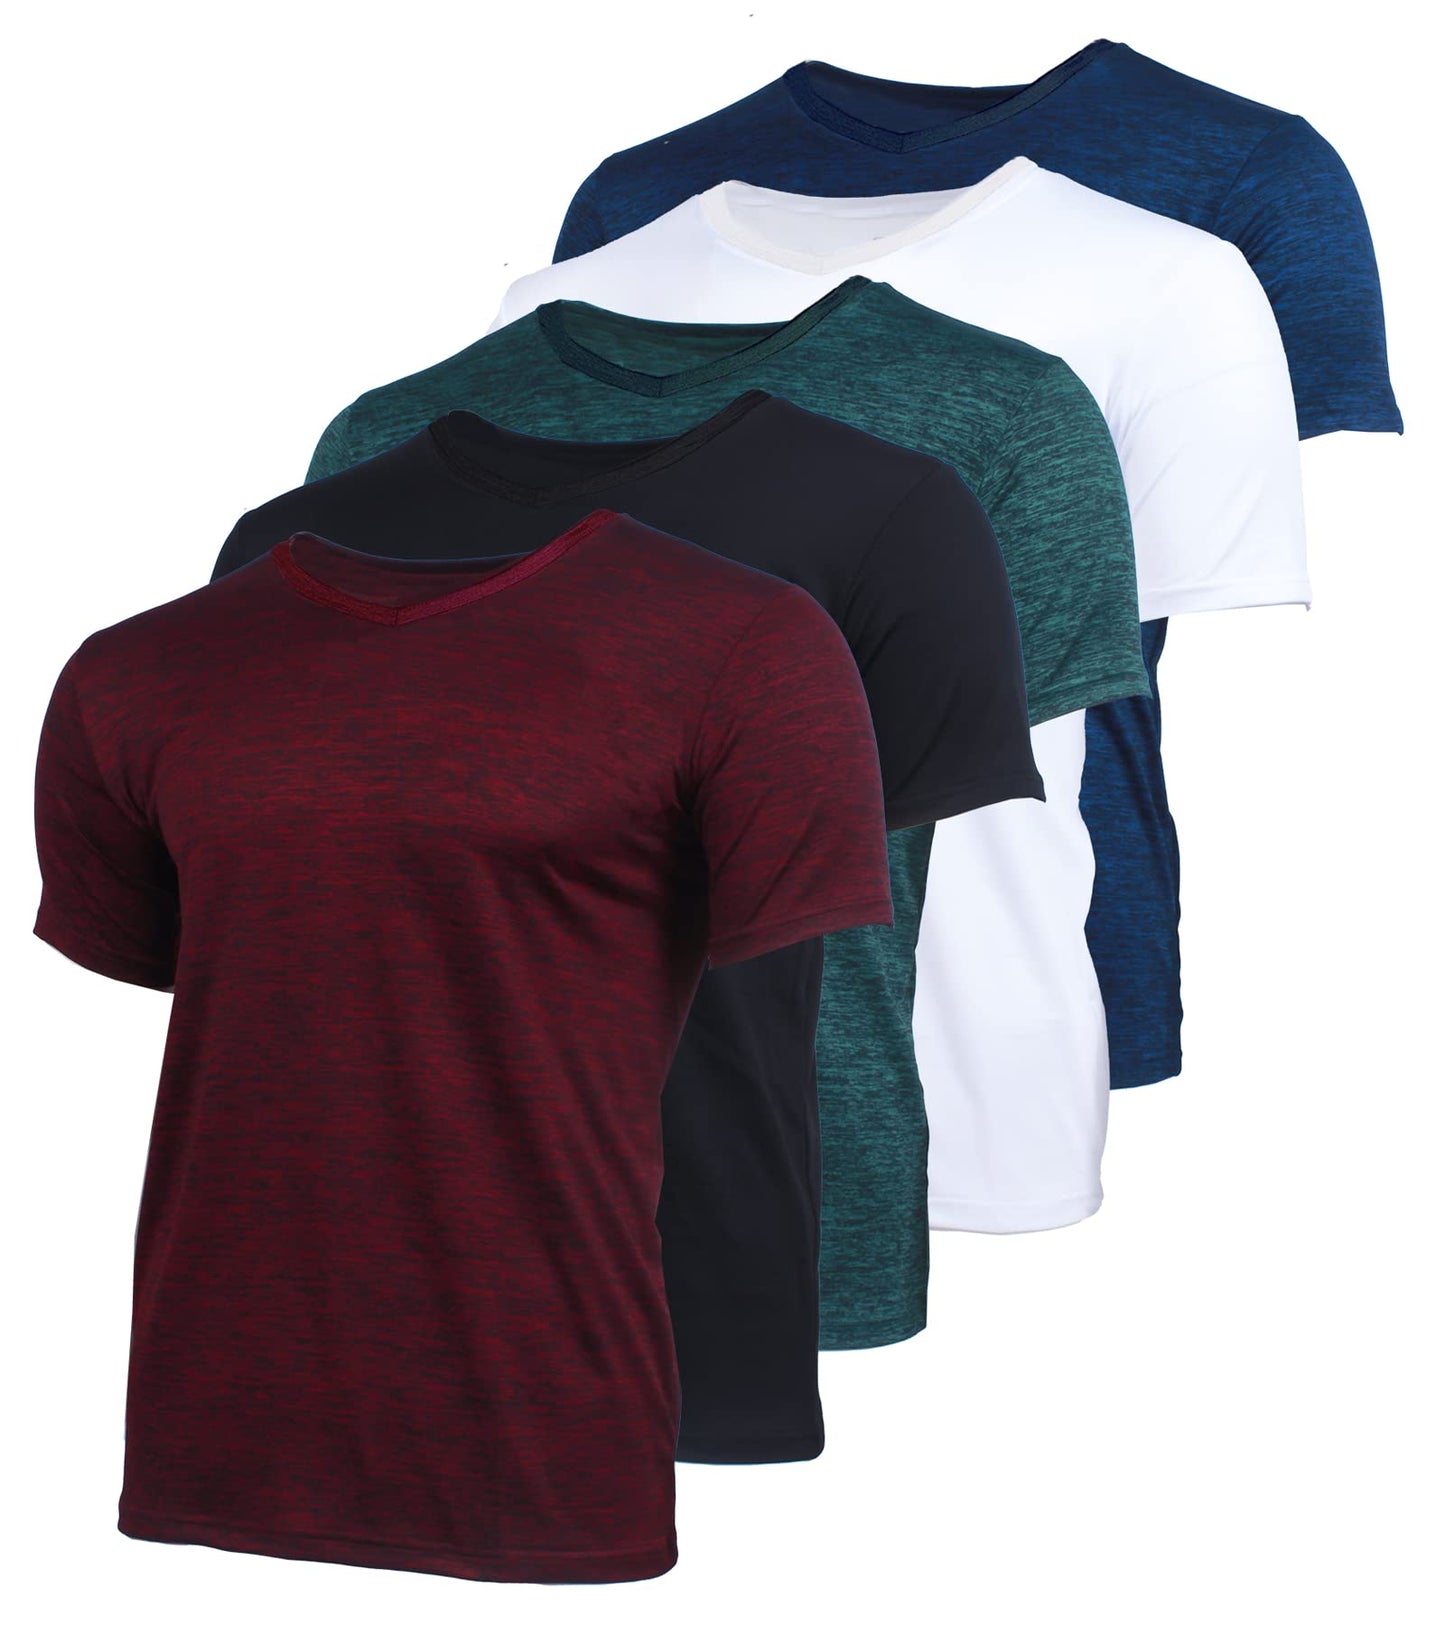 BROOKLYN VERTICAL Men’s 5-Pack V-Neck Quick Dry Moisture Wicking Active Athletic Performance T-Shirt